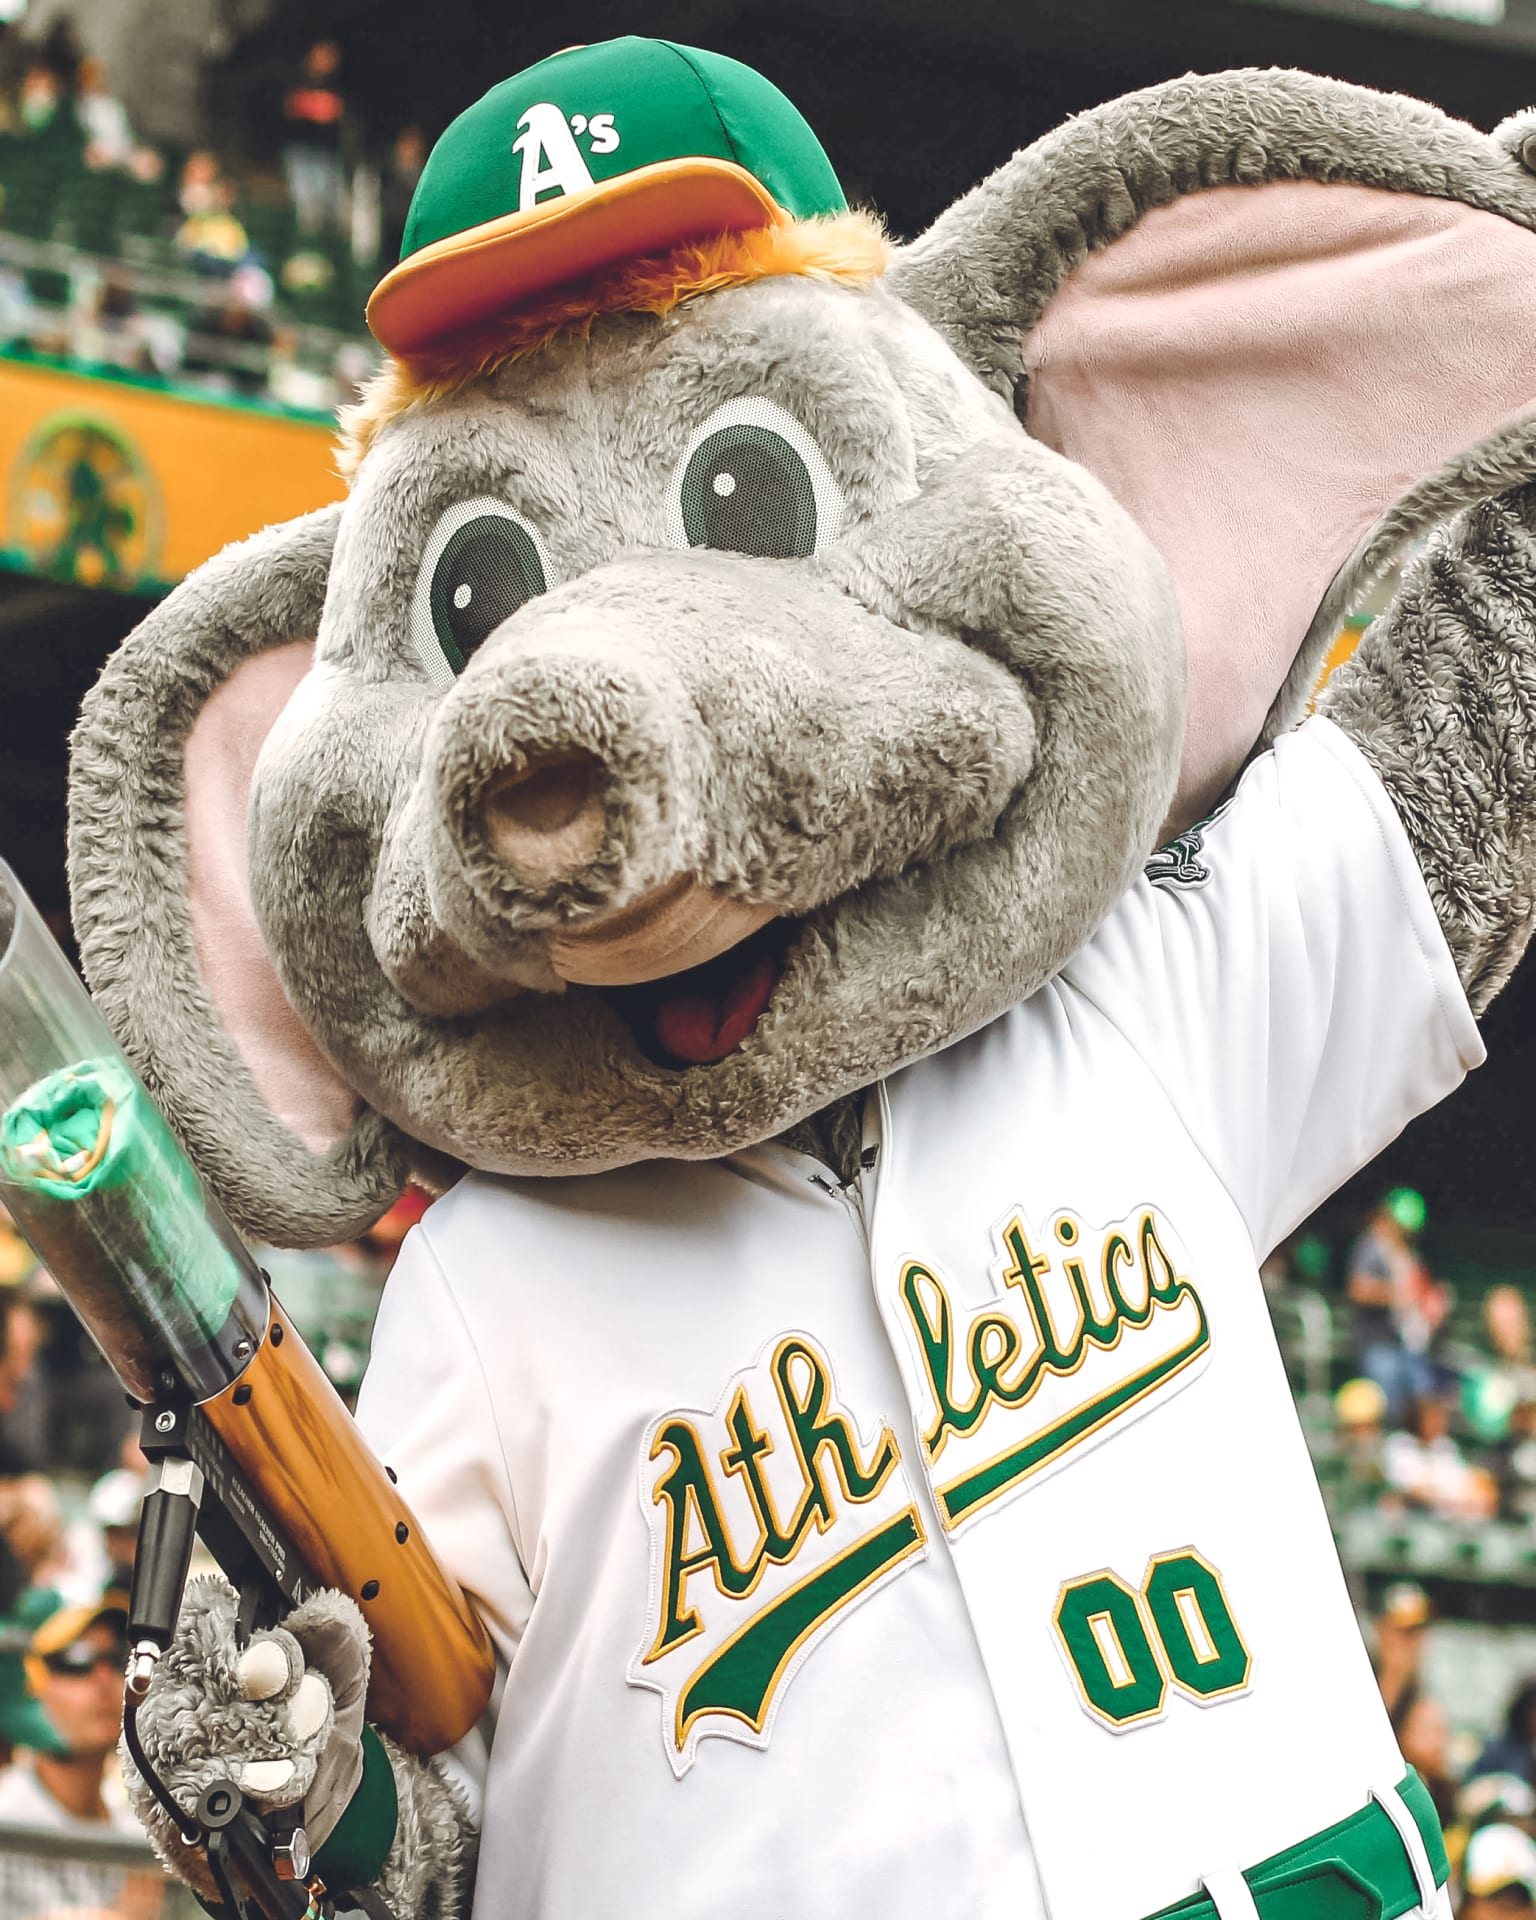 Why is the Oakland Athletics' team mascot an elephant? - Quora